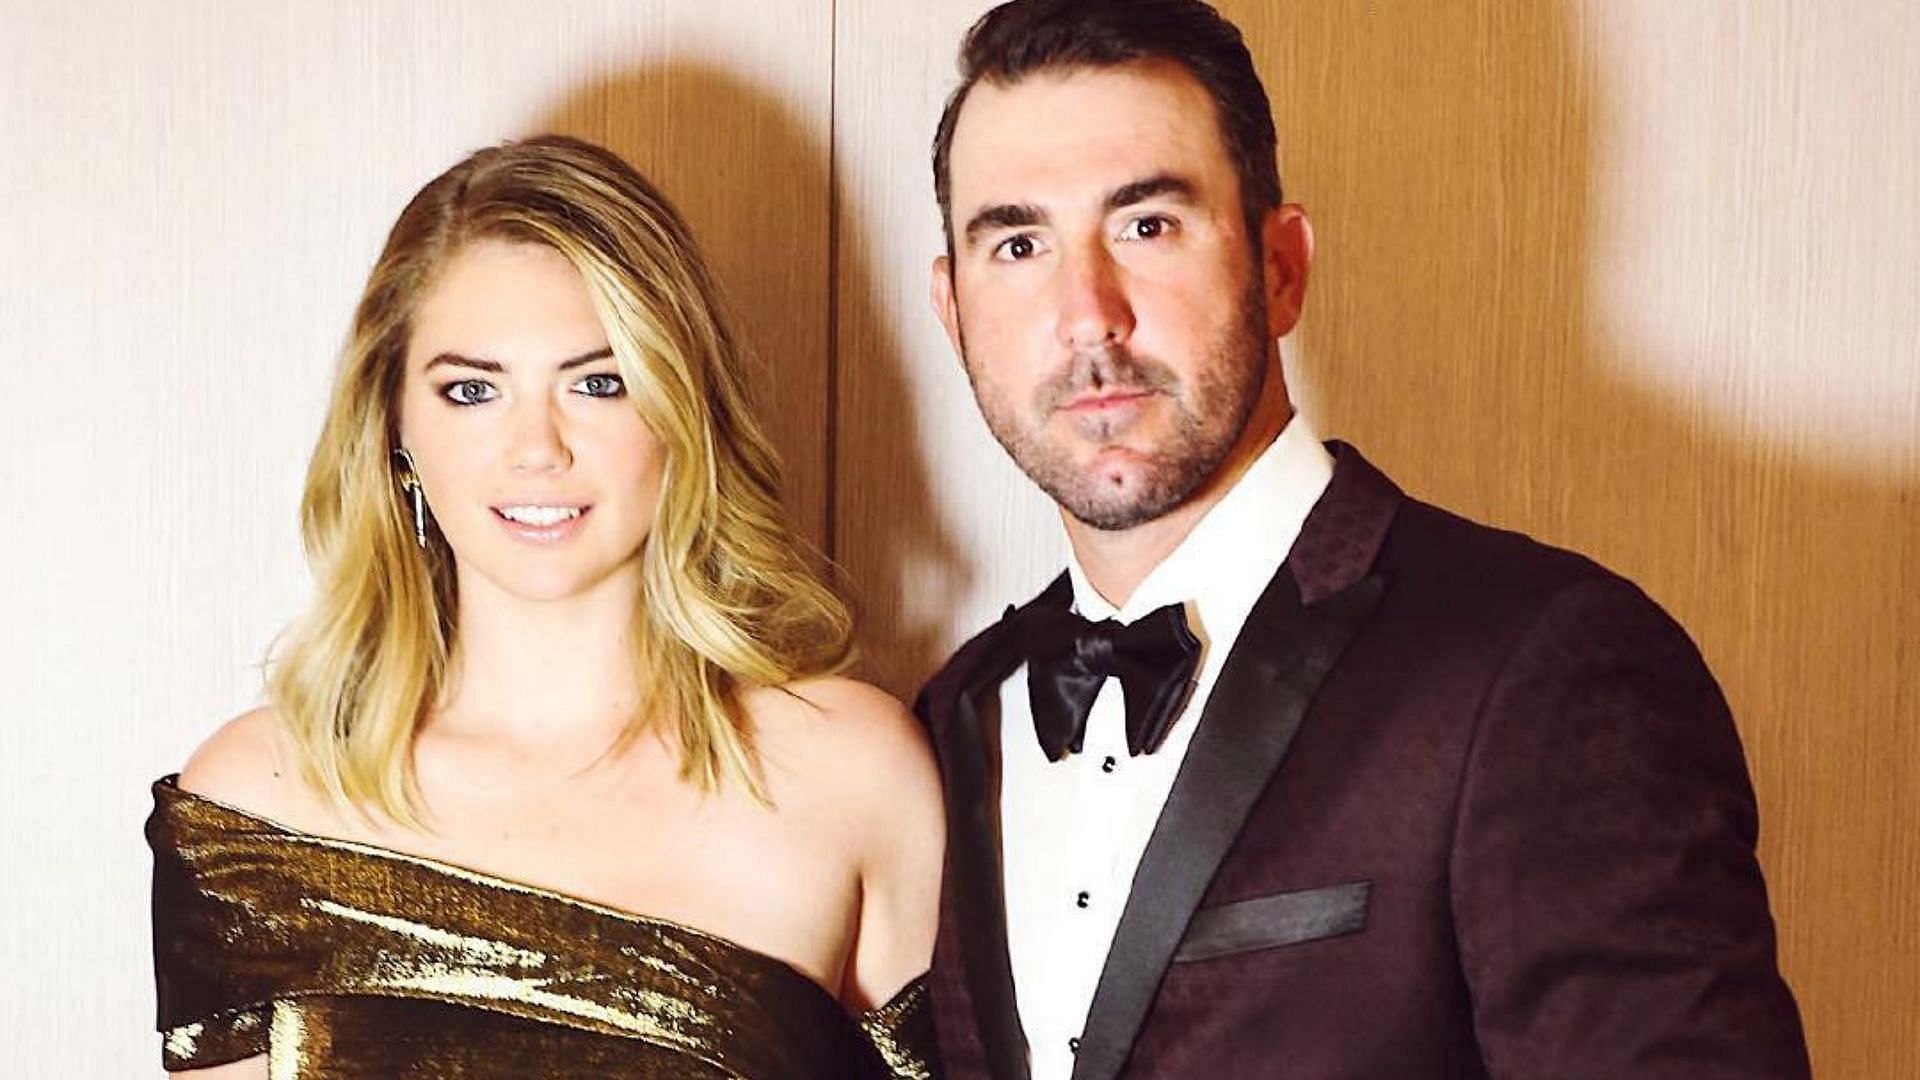 Sports Illustrated Swimsuit Issue fame Kate Upton with her husband Justin Verlander.